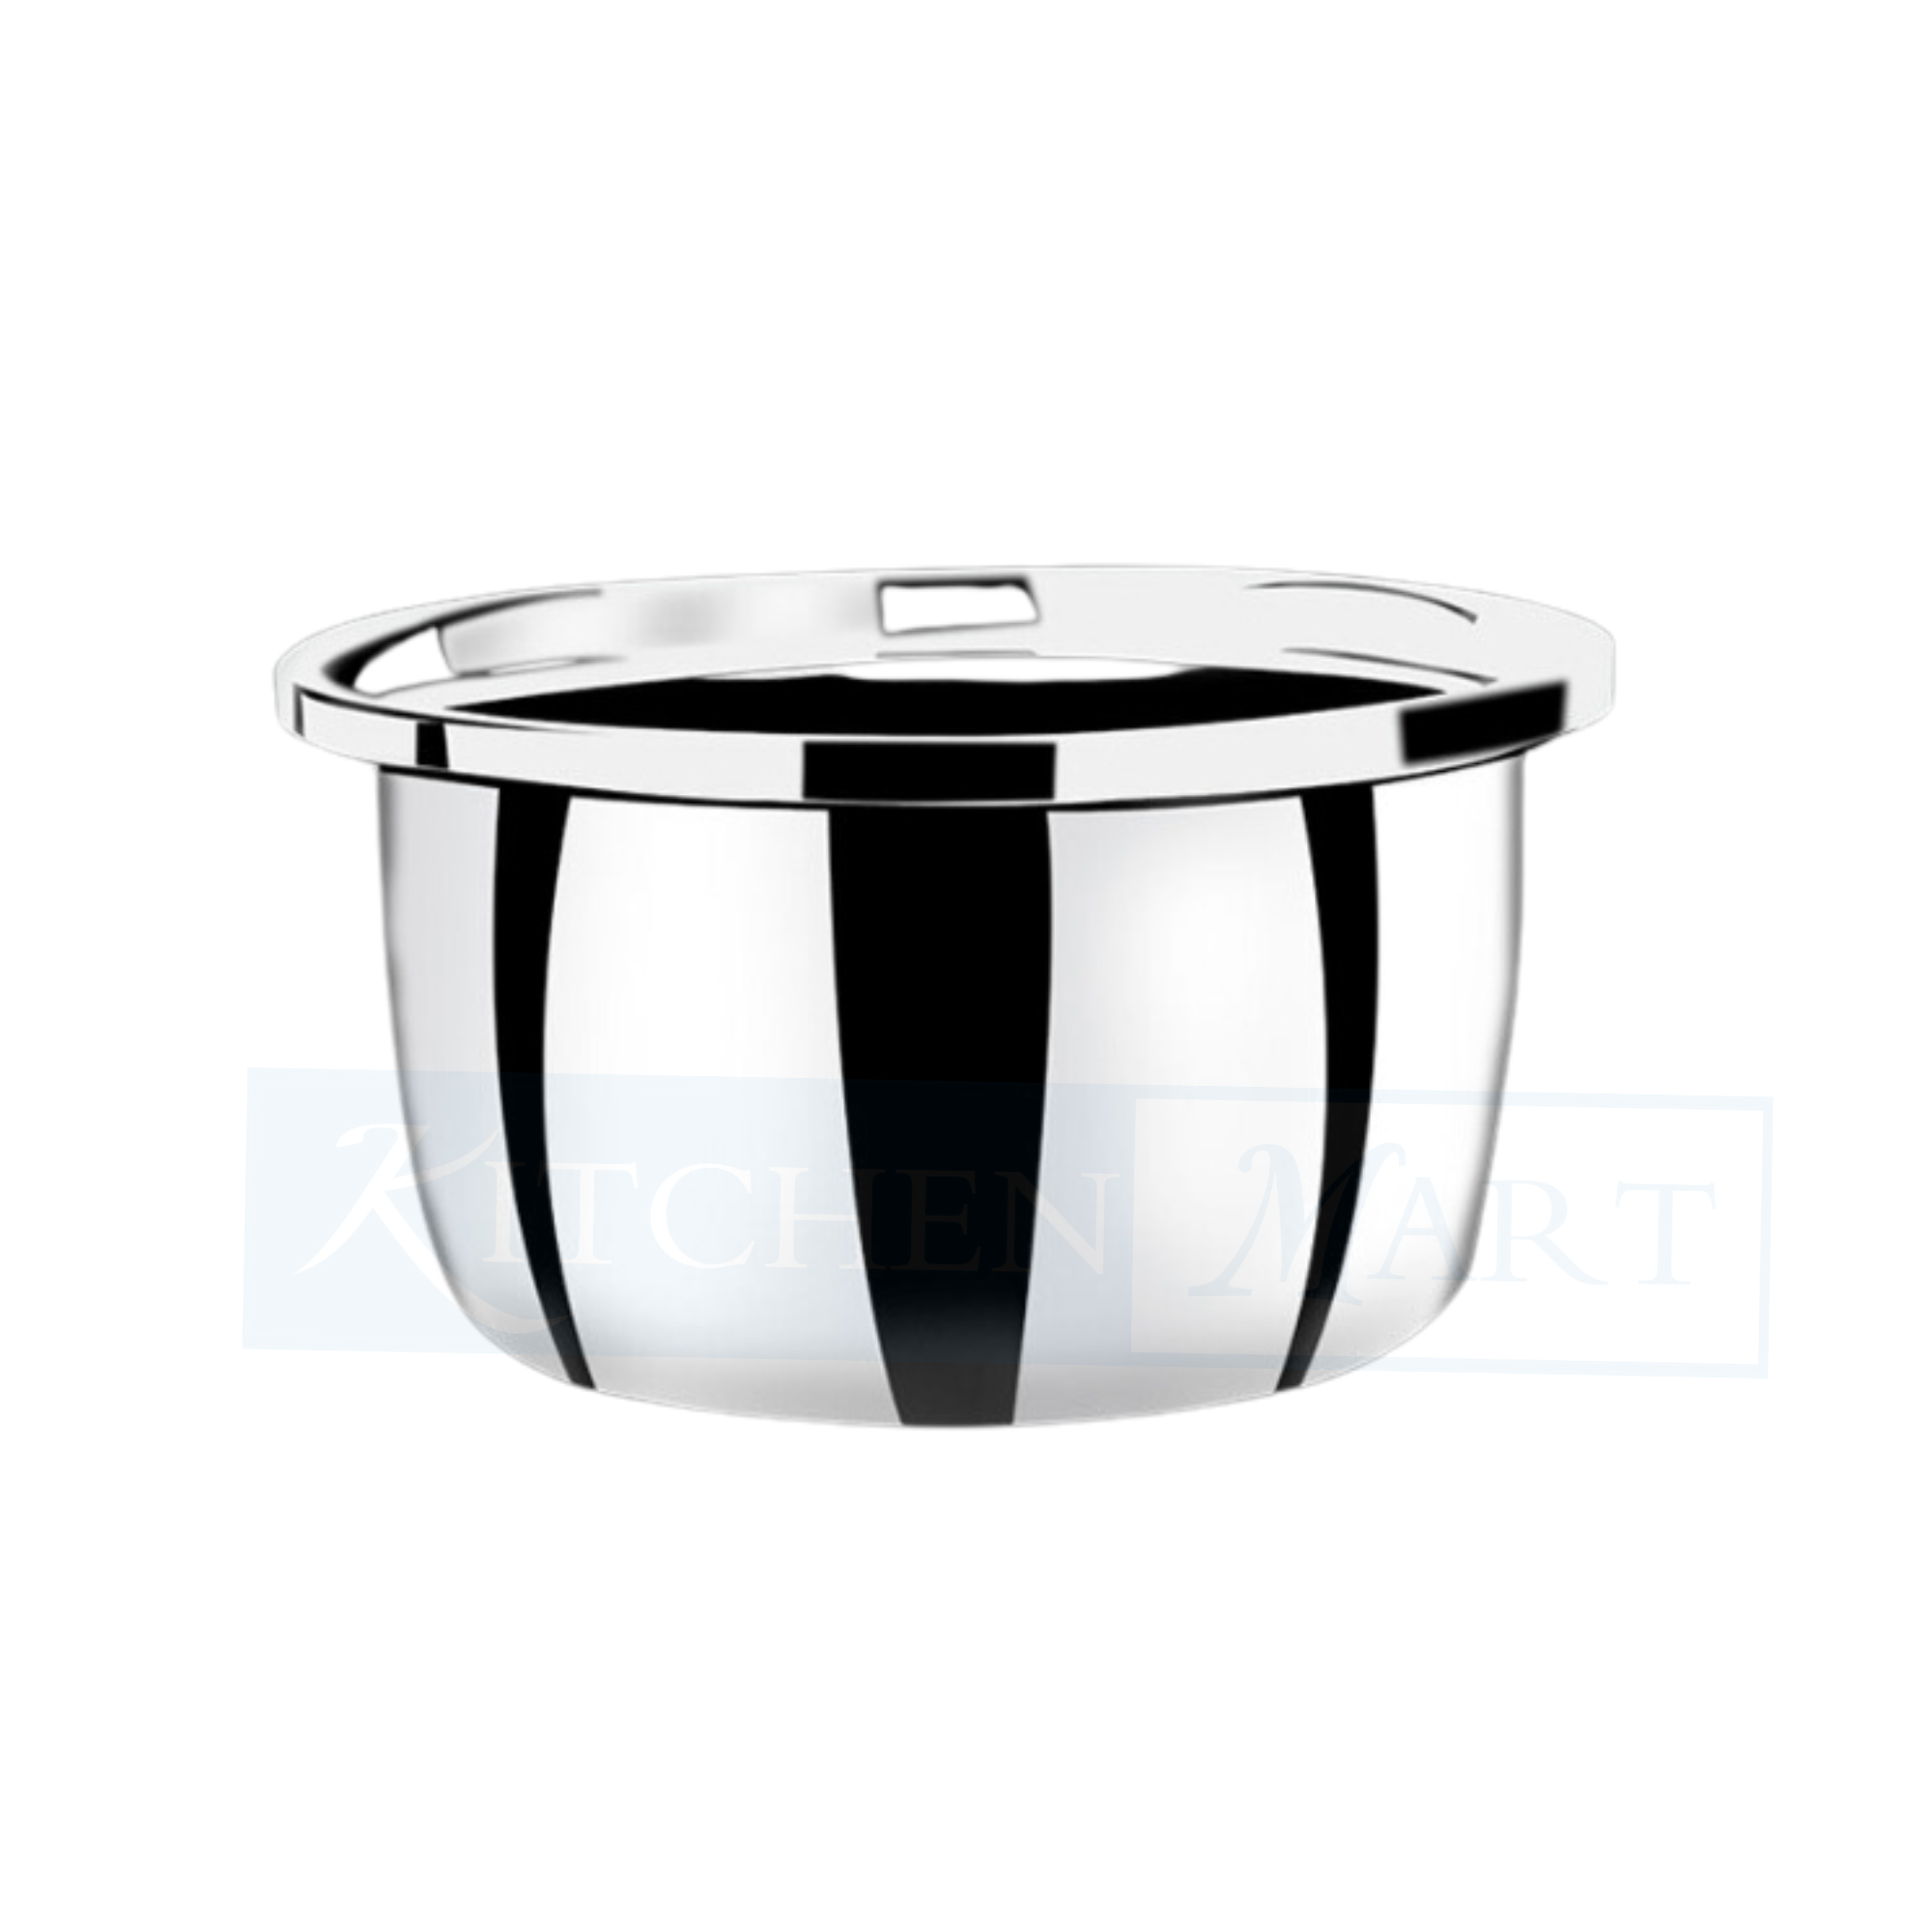 Panasonic SR-WA18H (SUS) - Premium Triply Stainless Steel Rice Cooker for Perfect Cooking